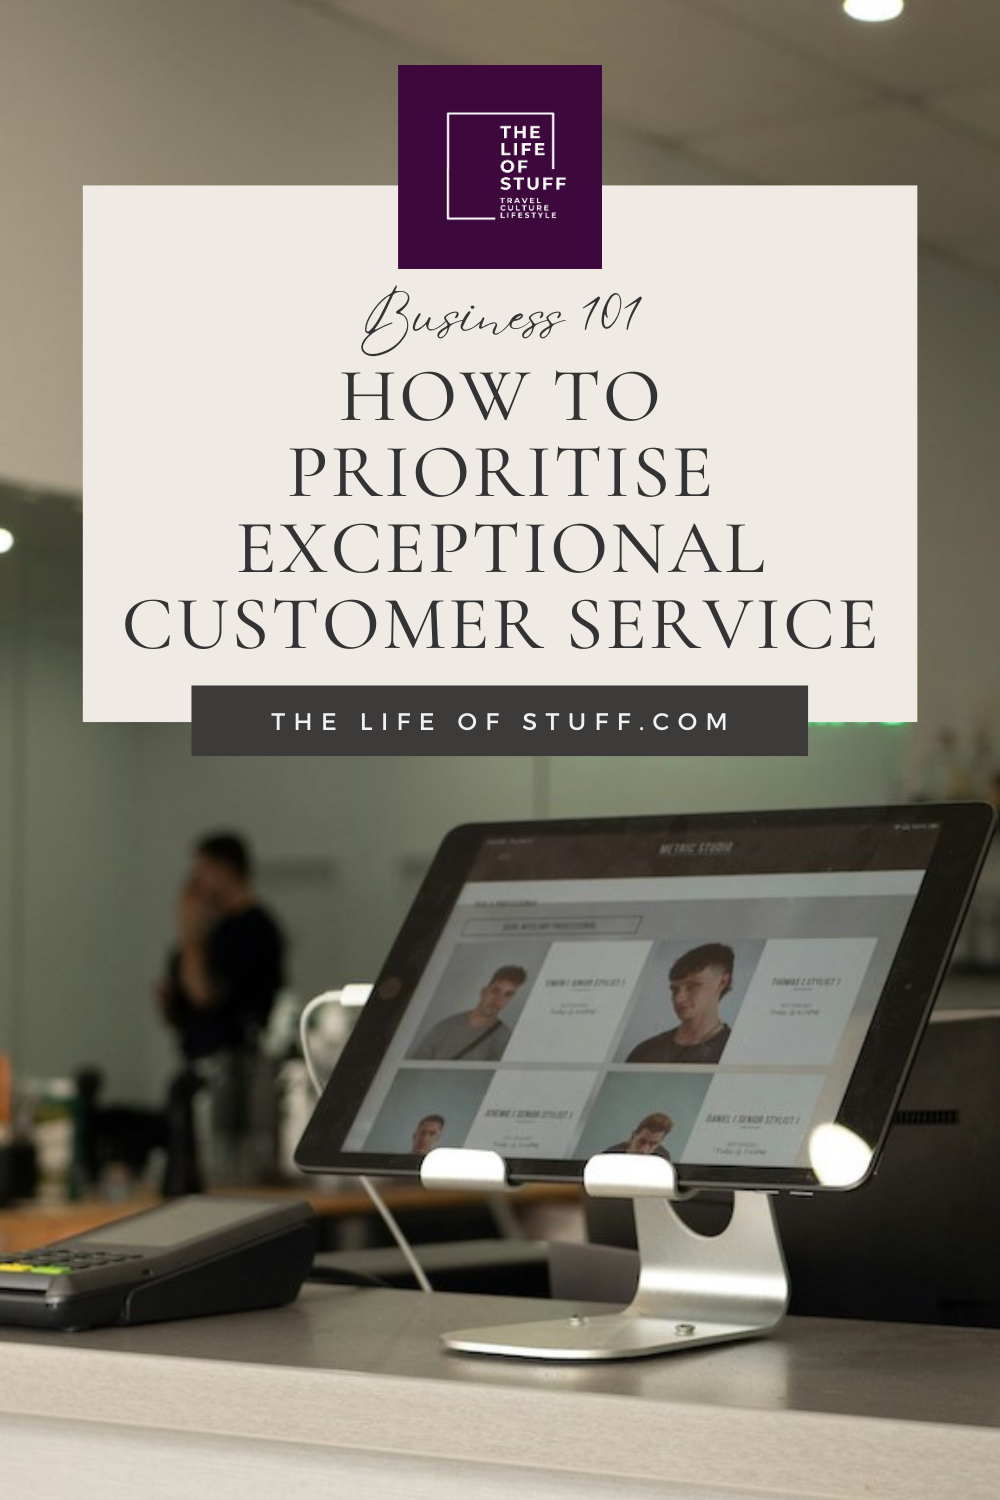 How to Prioritise Exceptional Customer Service - The Life of Stuff